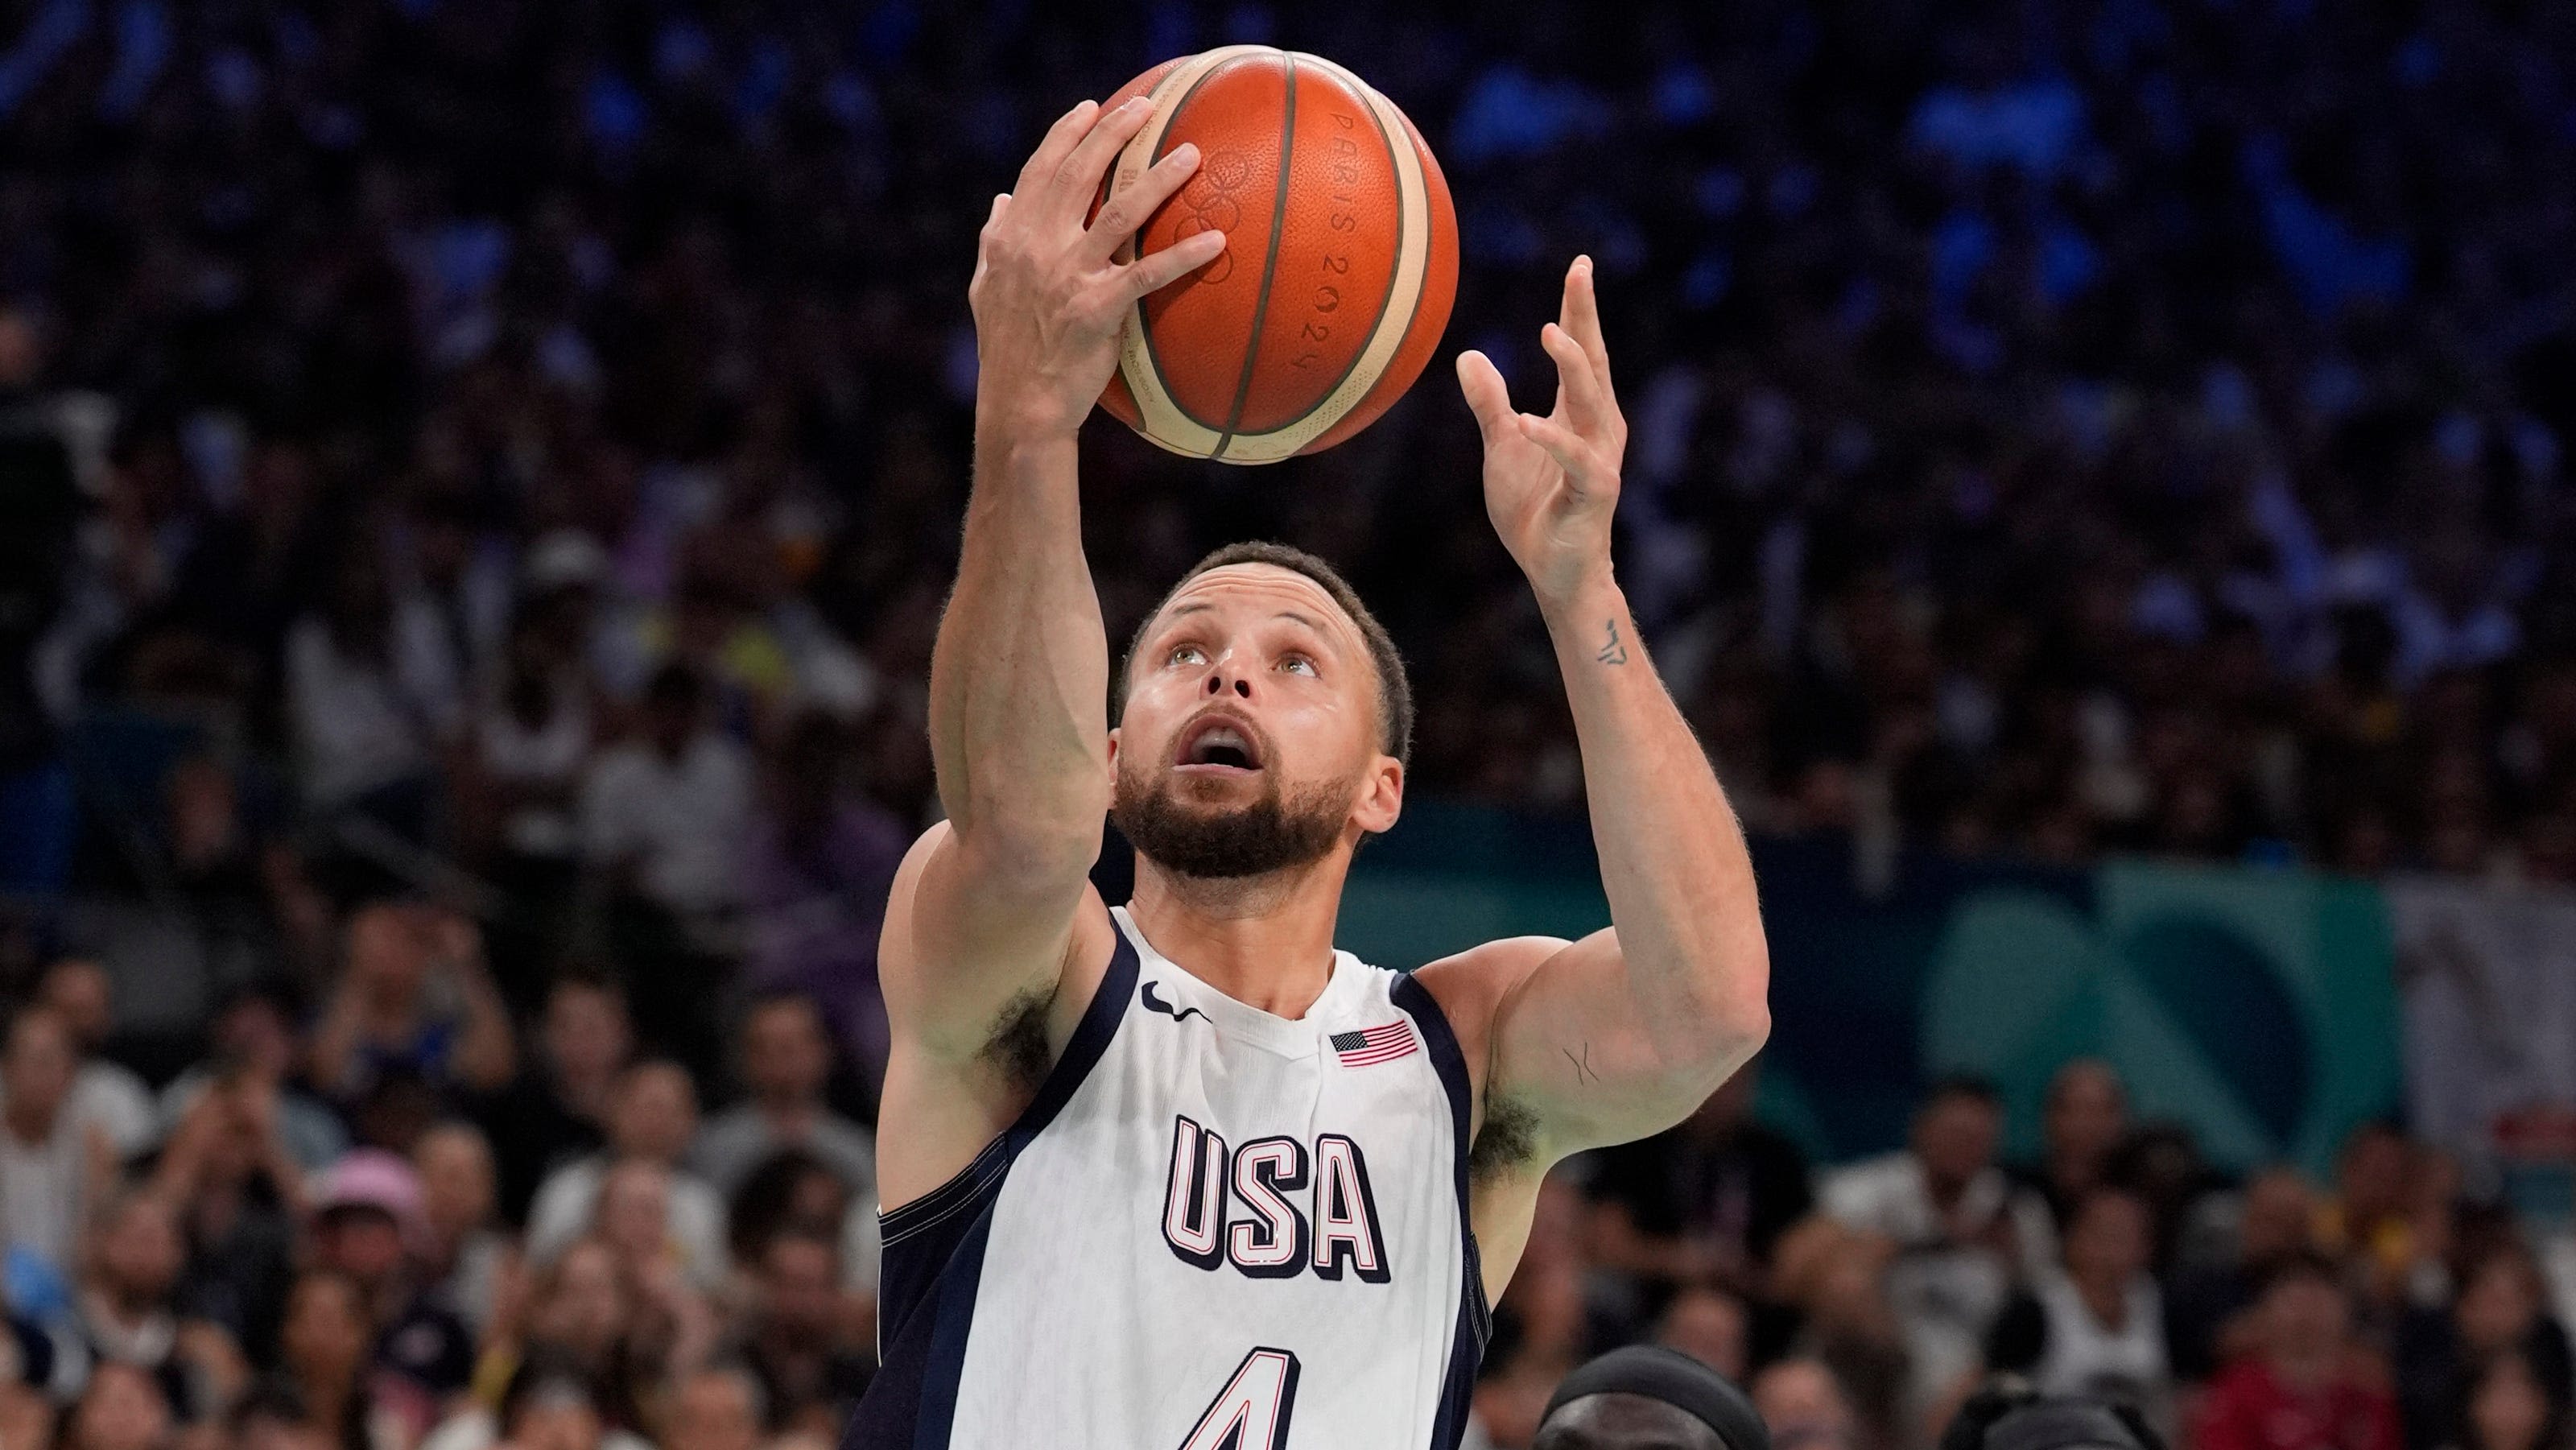 While Steph Curry looks for his shot, US glides past South Sudan in Olympics